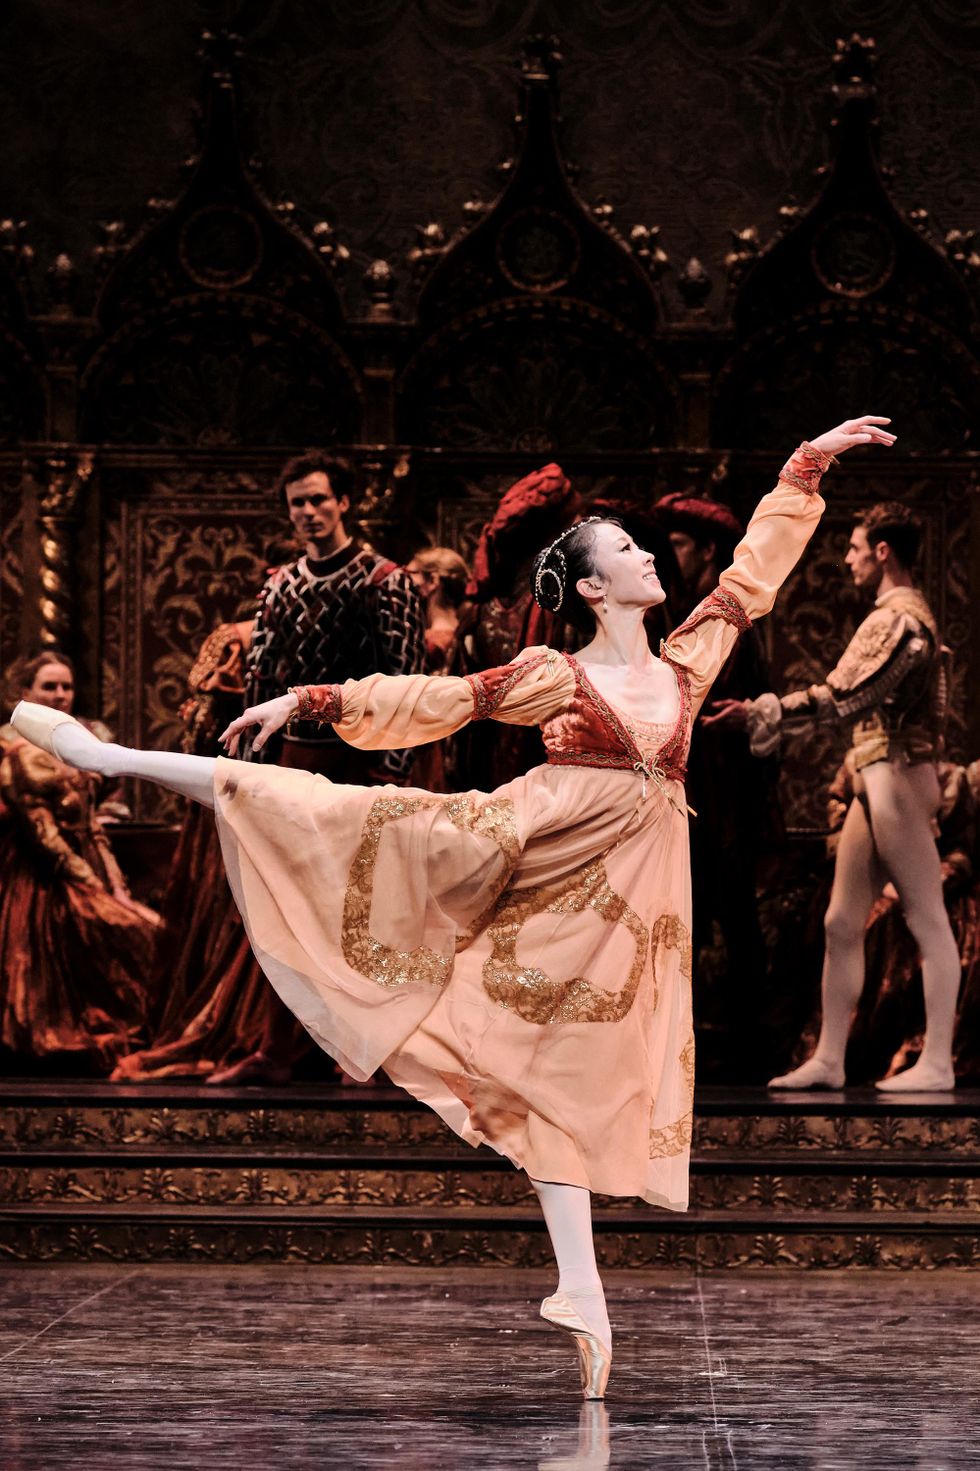 Sae Eun Park, in an elaborate peach and rust dress, pink tights, and pointe shoes, smiles as she balances in first arabesque. Behind her, dancers in opulent dresses and tunics watch.